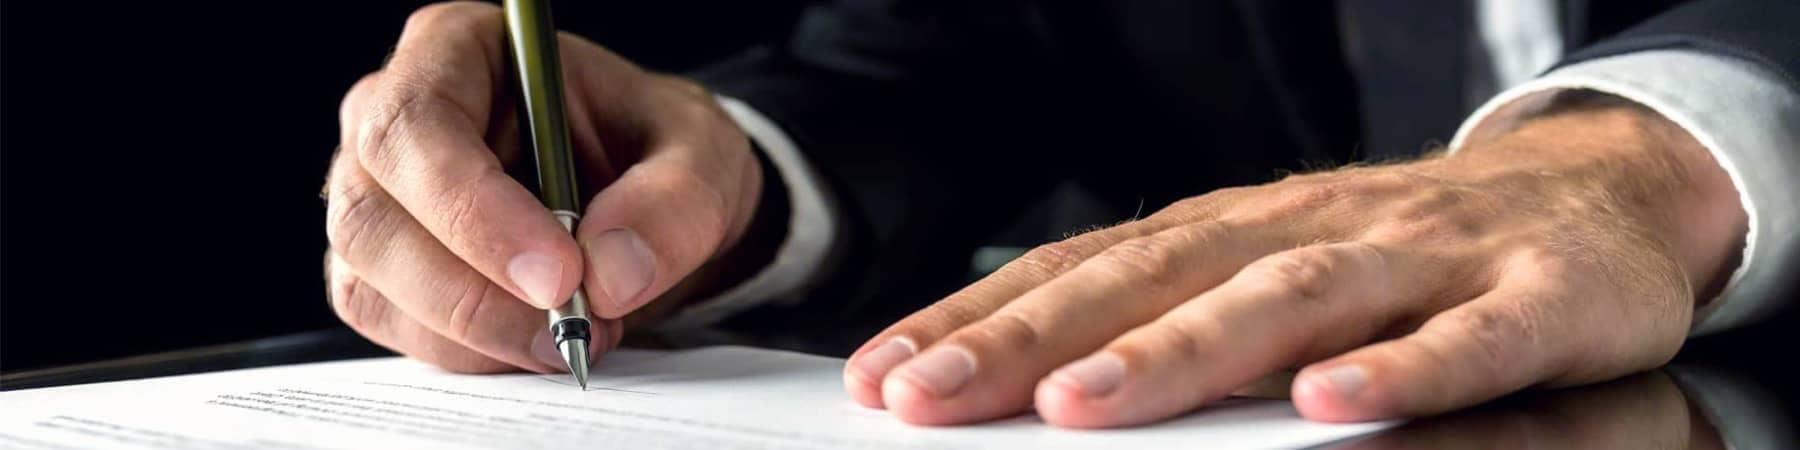 Hands of Man in Suit Signing Document